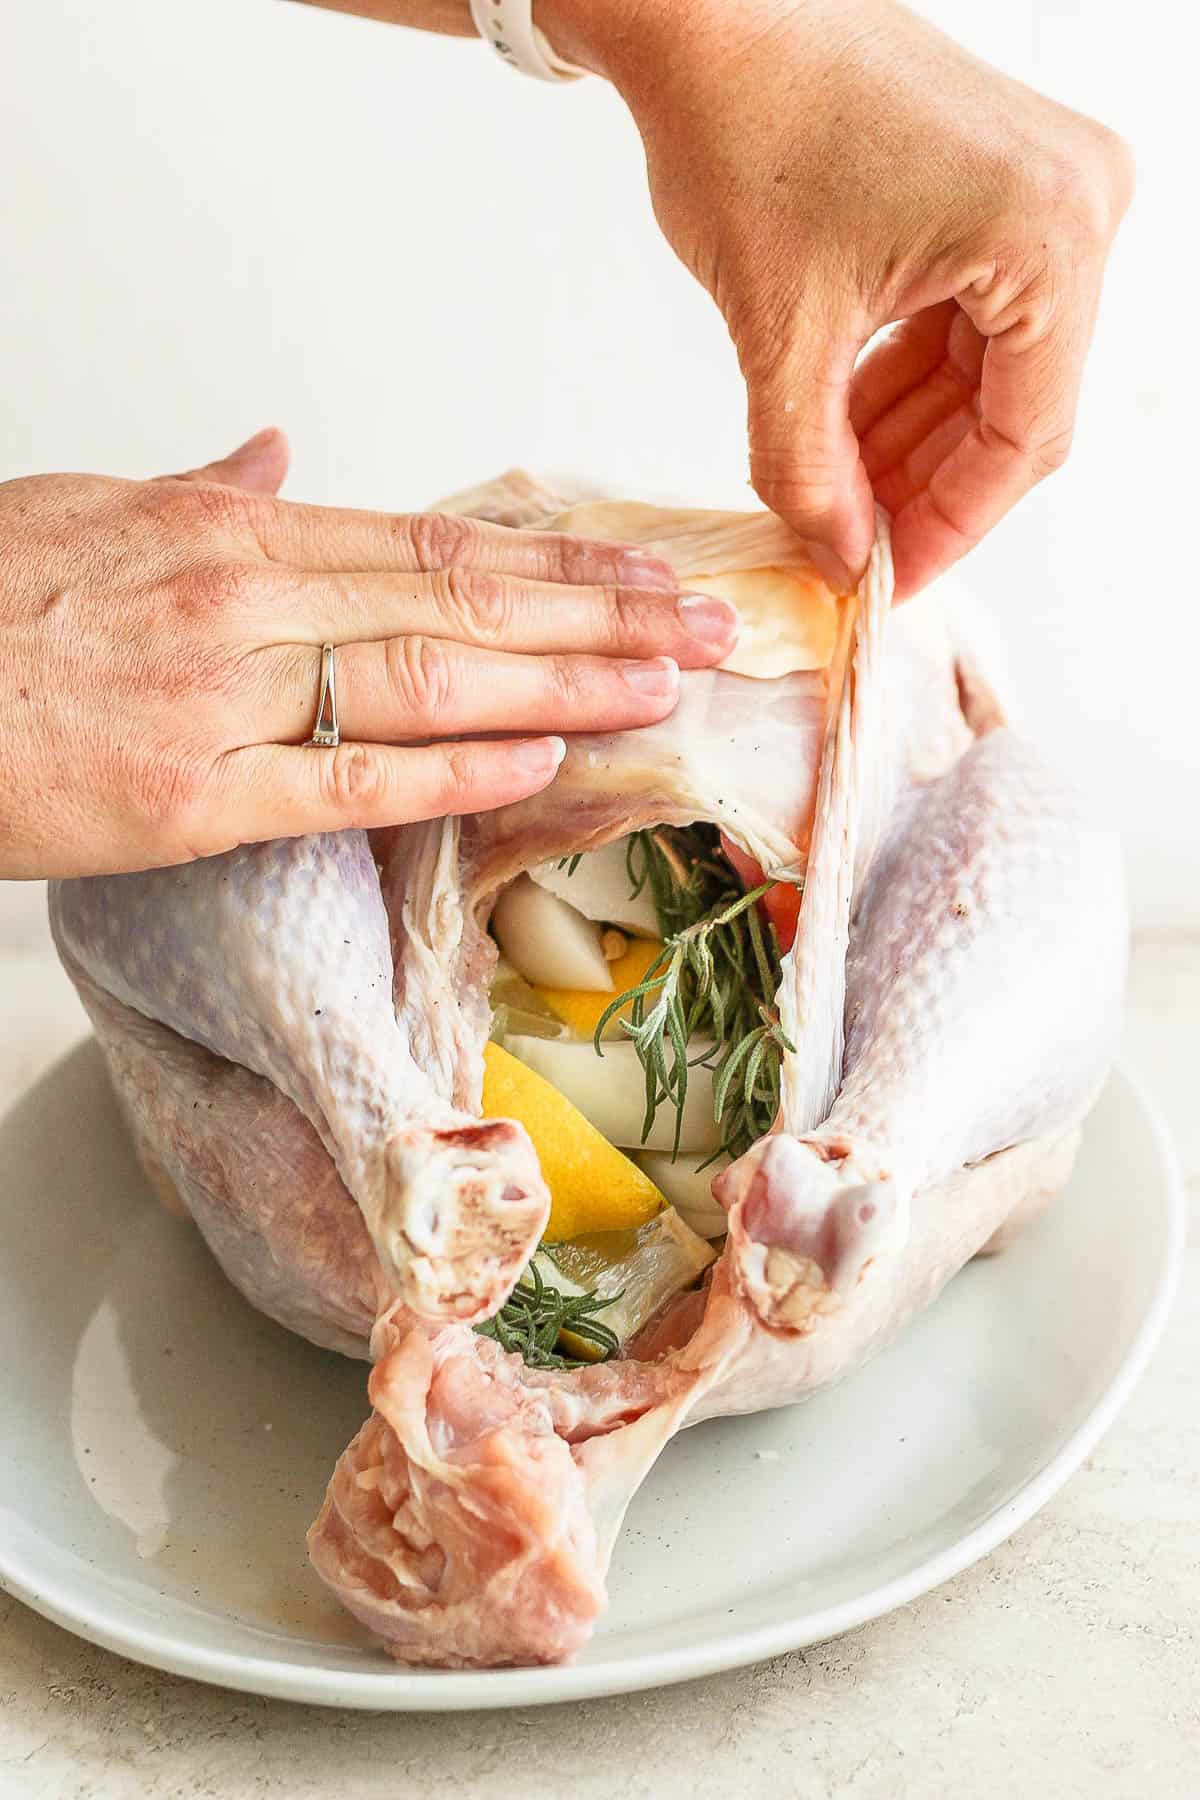 An orange, onion, and fresh herbs stuffed in the turkey and butter being placed under the skin.